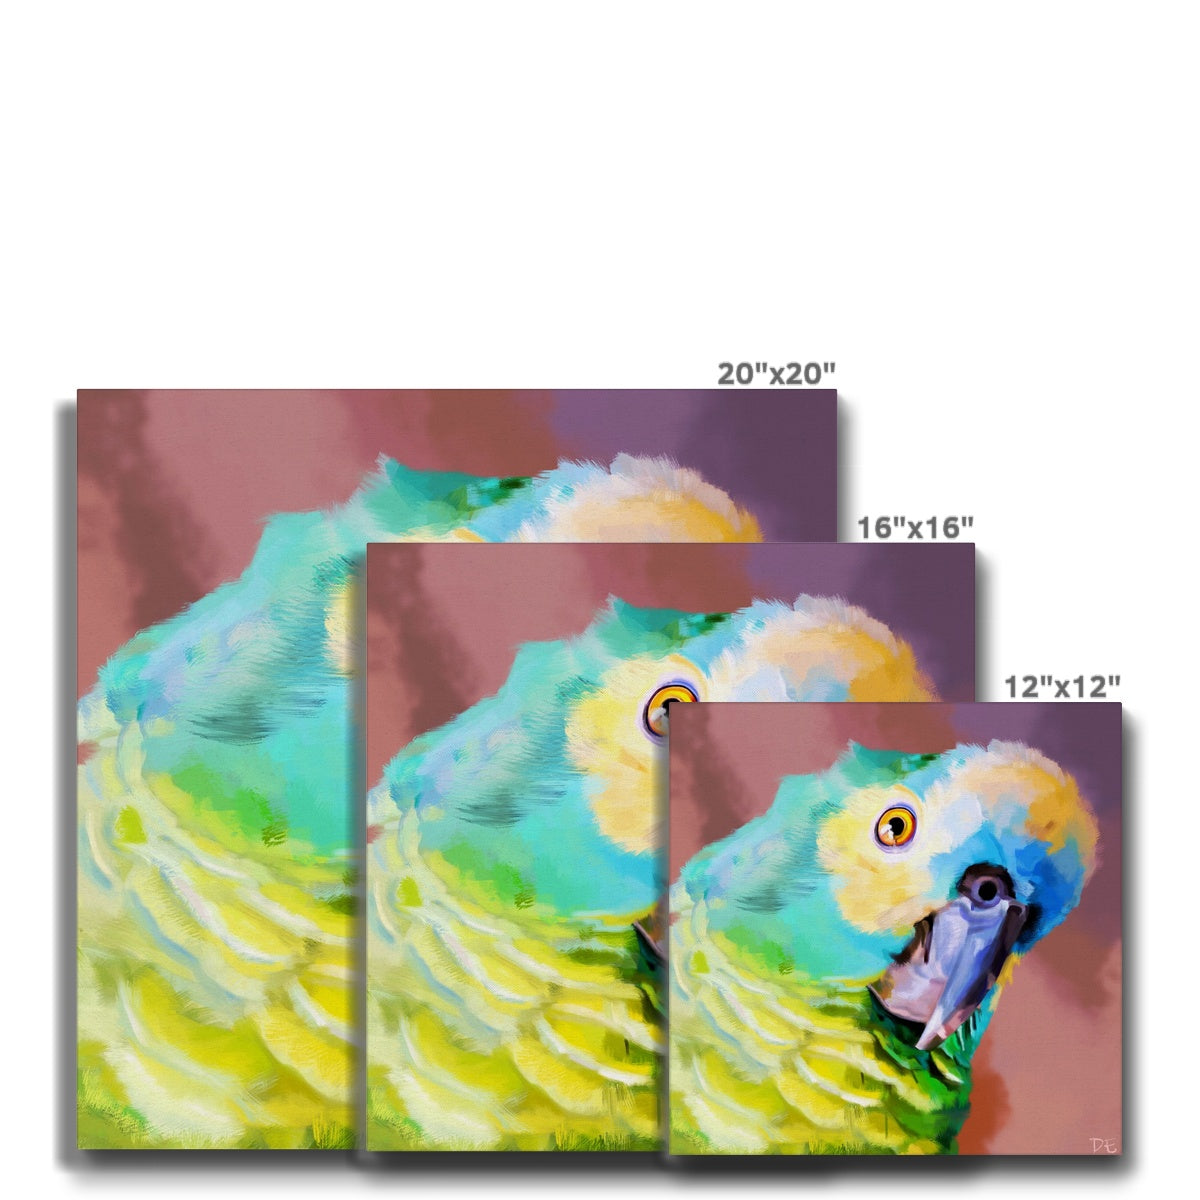 Ahoy there! It's a parrot's life for me! - Canvas